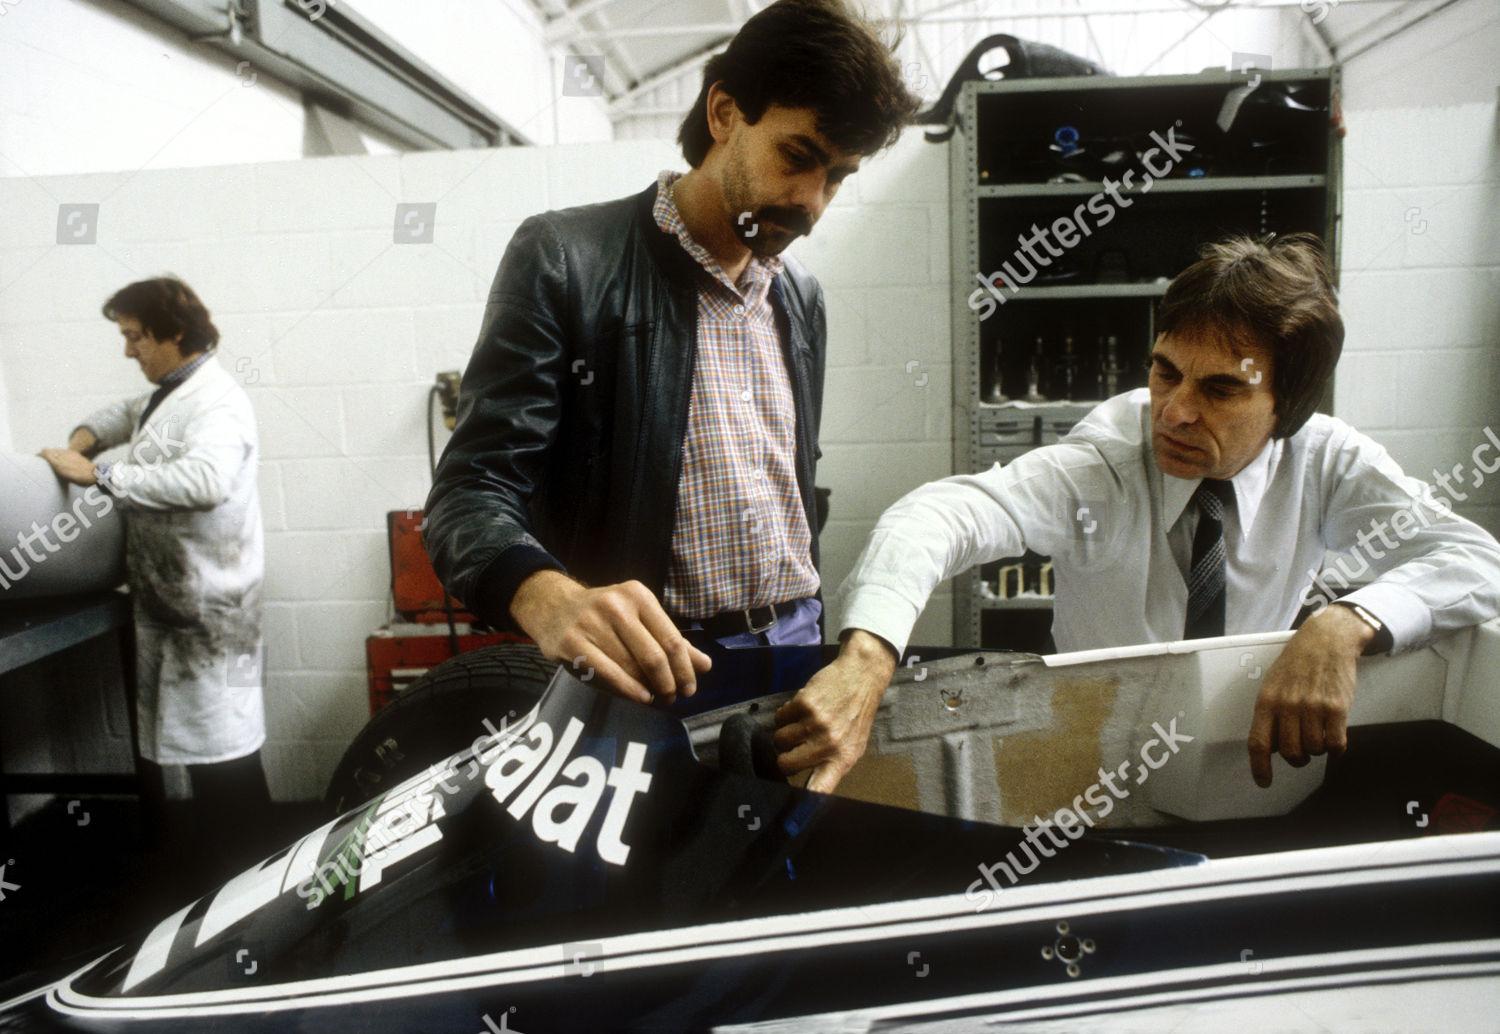 D:\Documenti\posts\posts\Gordon Murray - the leading F1 car designer of the 1970s and 1980s\foto\gordon-murray-shutterstock-editorial. Stock Image by Martyn Goddard, 1982.jpg